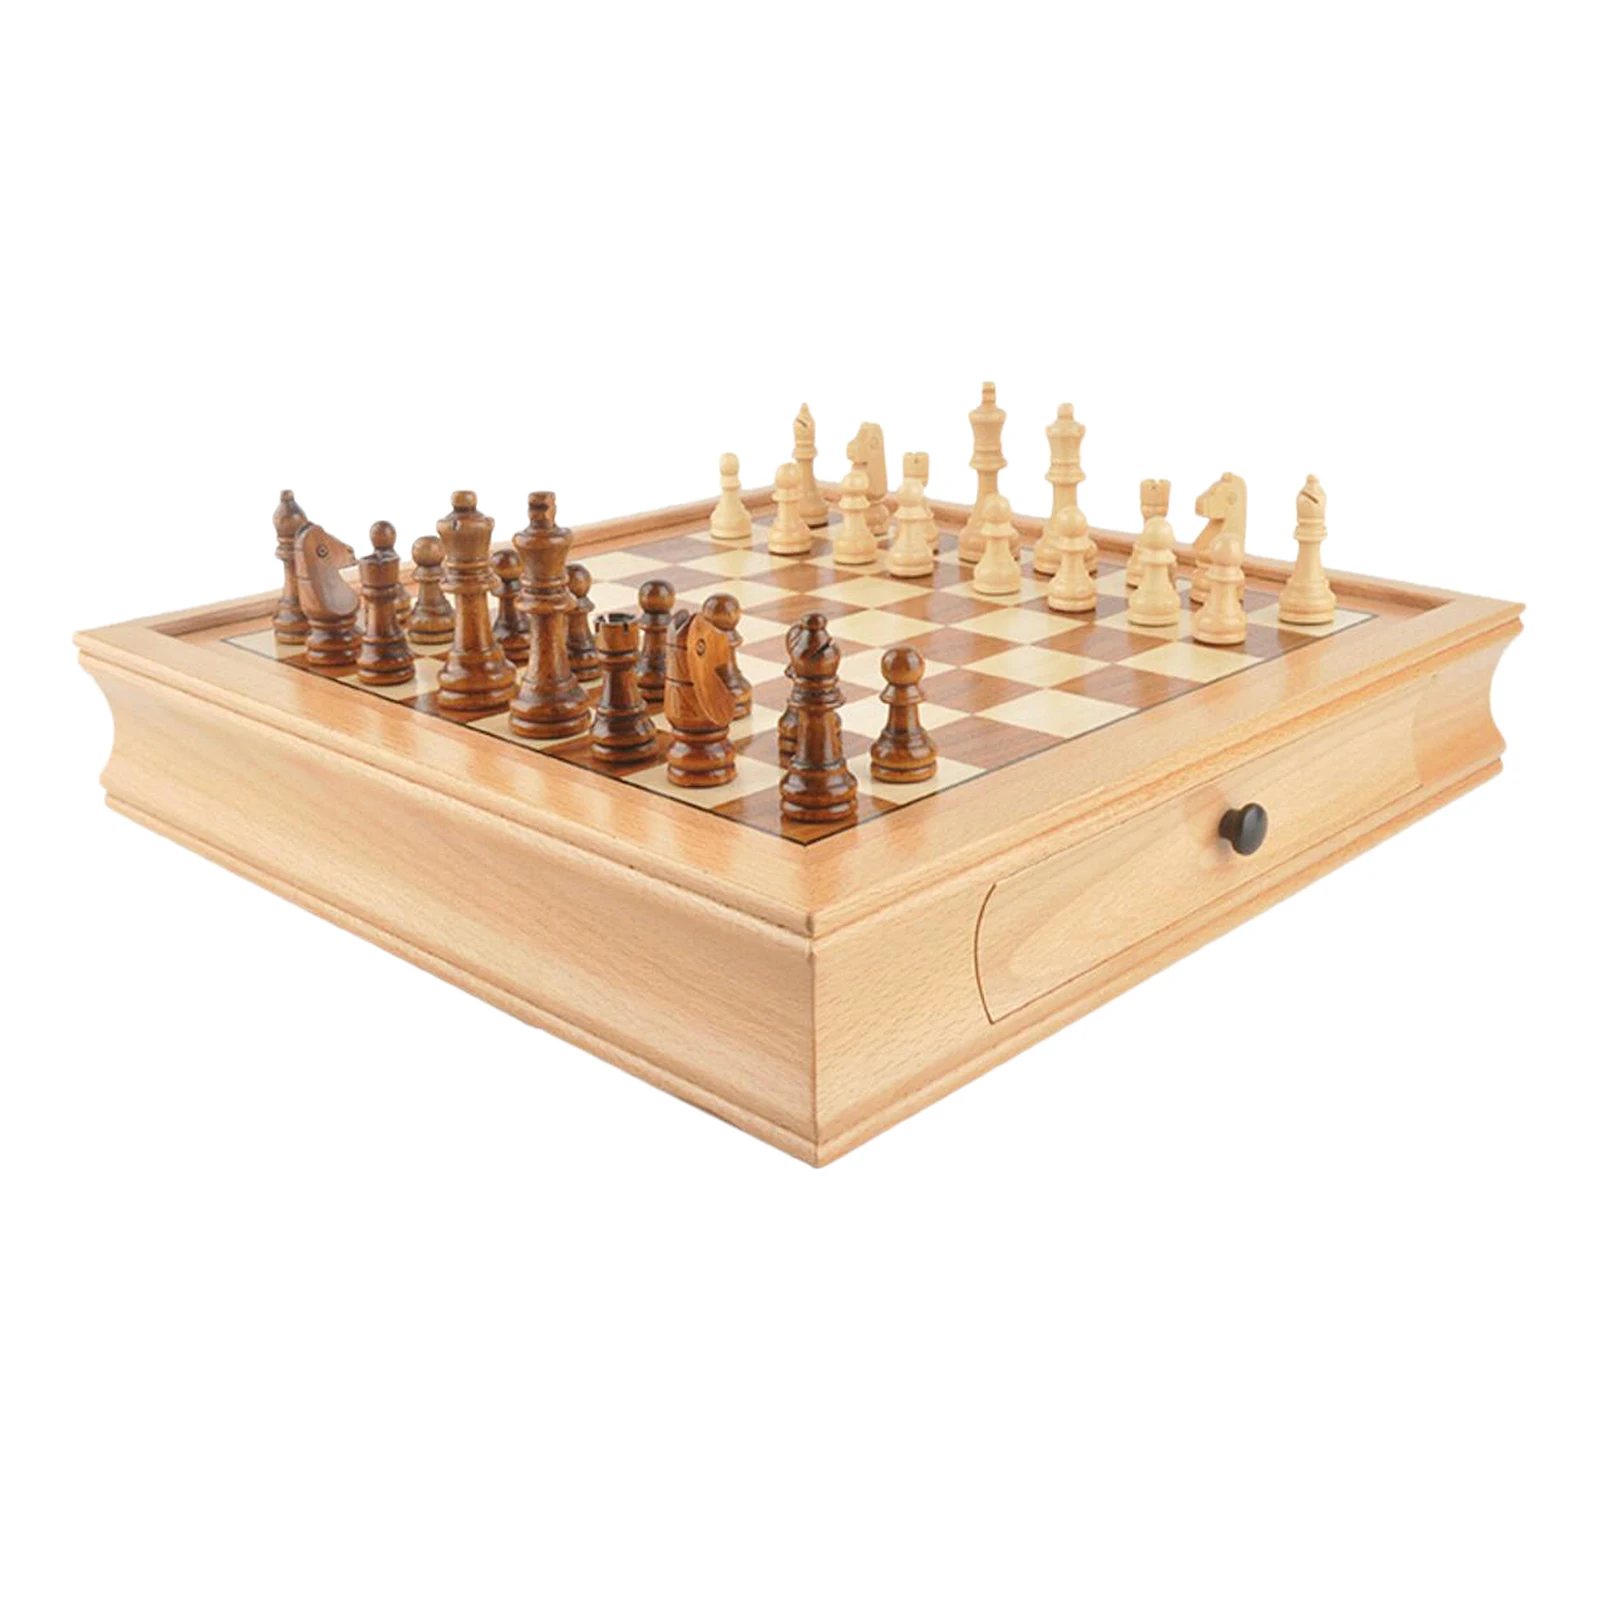 32cmx32cm Magnetic Wooden Chess Set Walnut with Storage Drawer Portable Top Quality Board Game for Kids Toy Puzzle